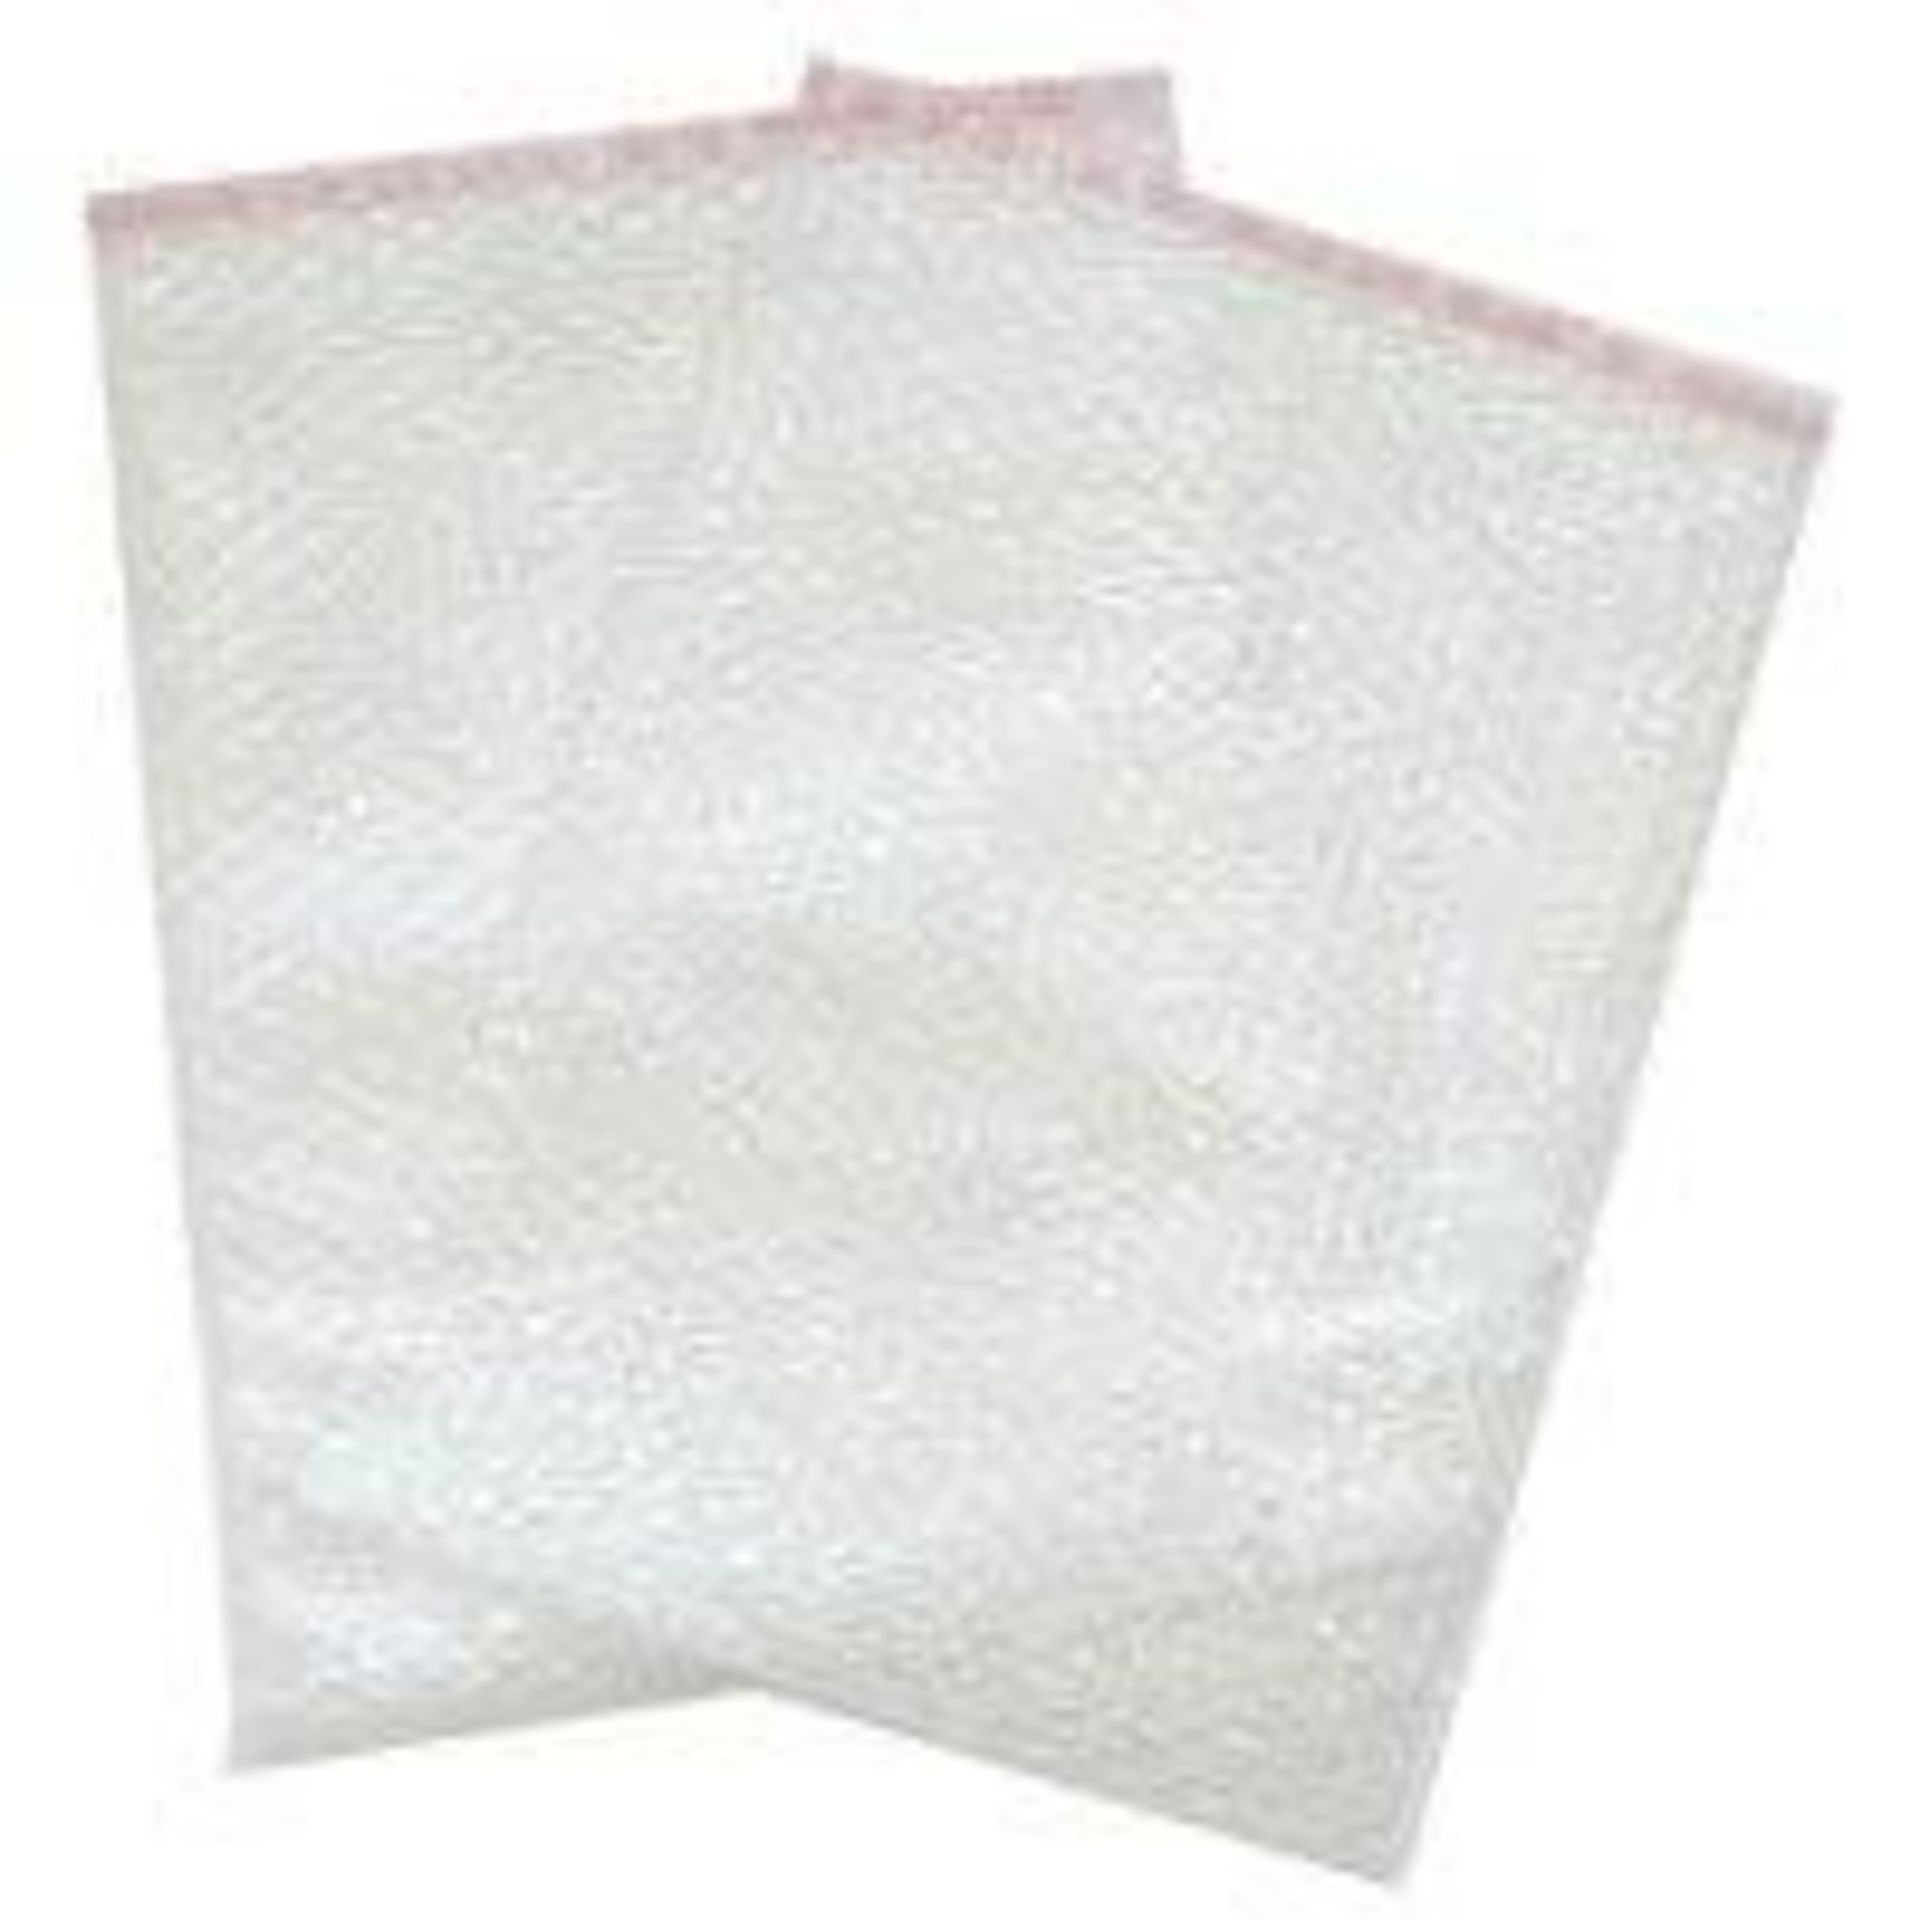 1015x1015mm Small Bubble Bag With 40mm Lip & Permanent Self Seal Strip (200 Quantity)